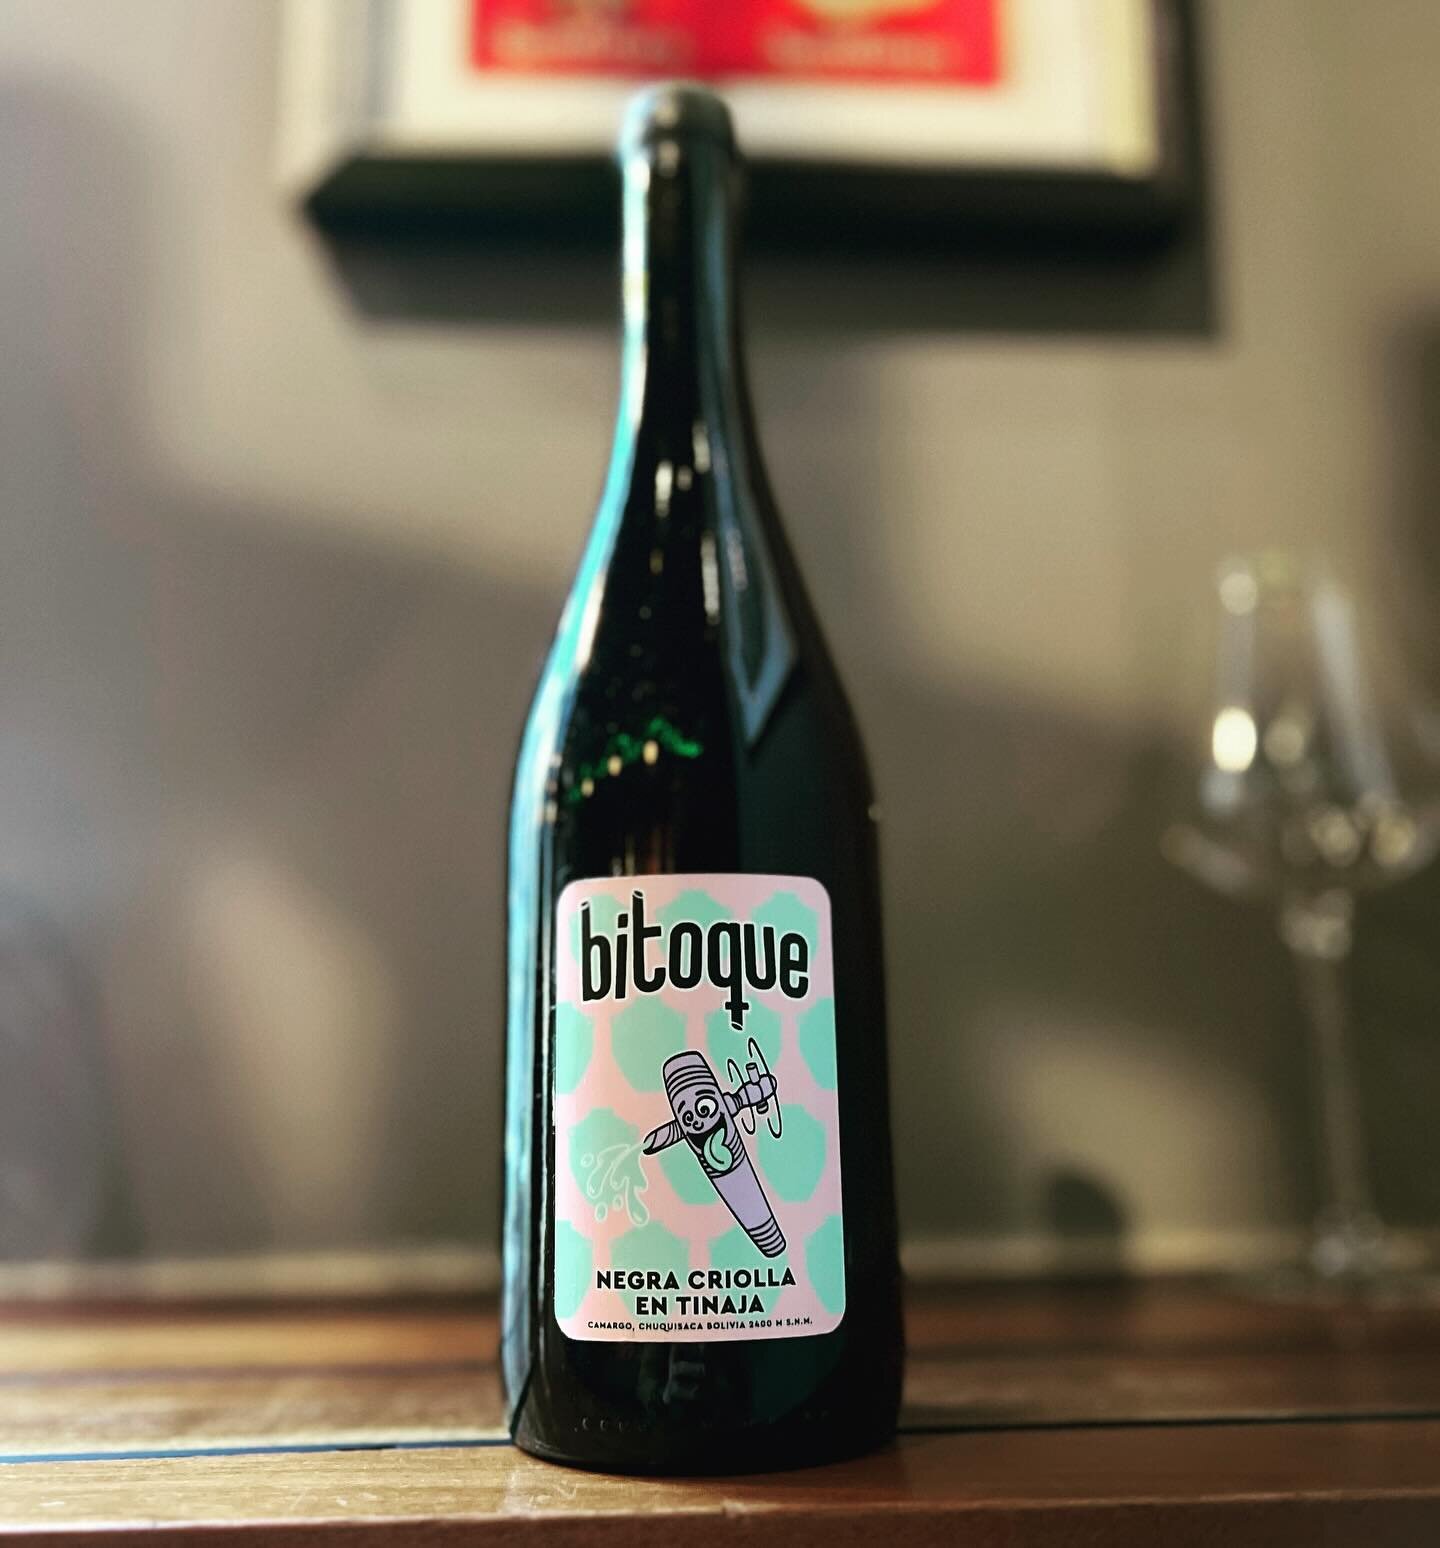 If you're not drinking Negra Criolla from Bolivian winemaker @bitoquewines are you actually living????

There's always time to course correct 😉

#takeadifferentpath #bolivianjuice #thisishowwedoit #bitoquewines #vinoweknow #haleyhenrybar #bostonwine